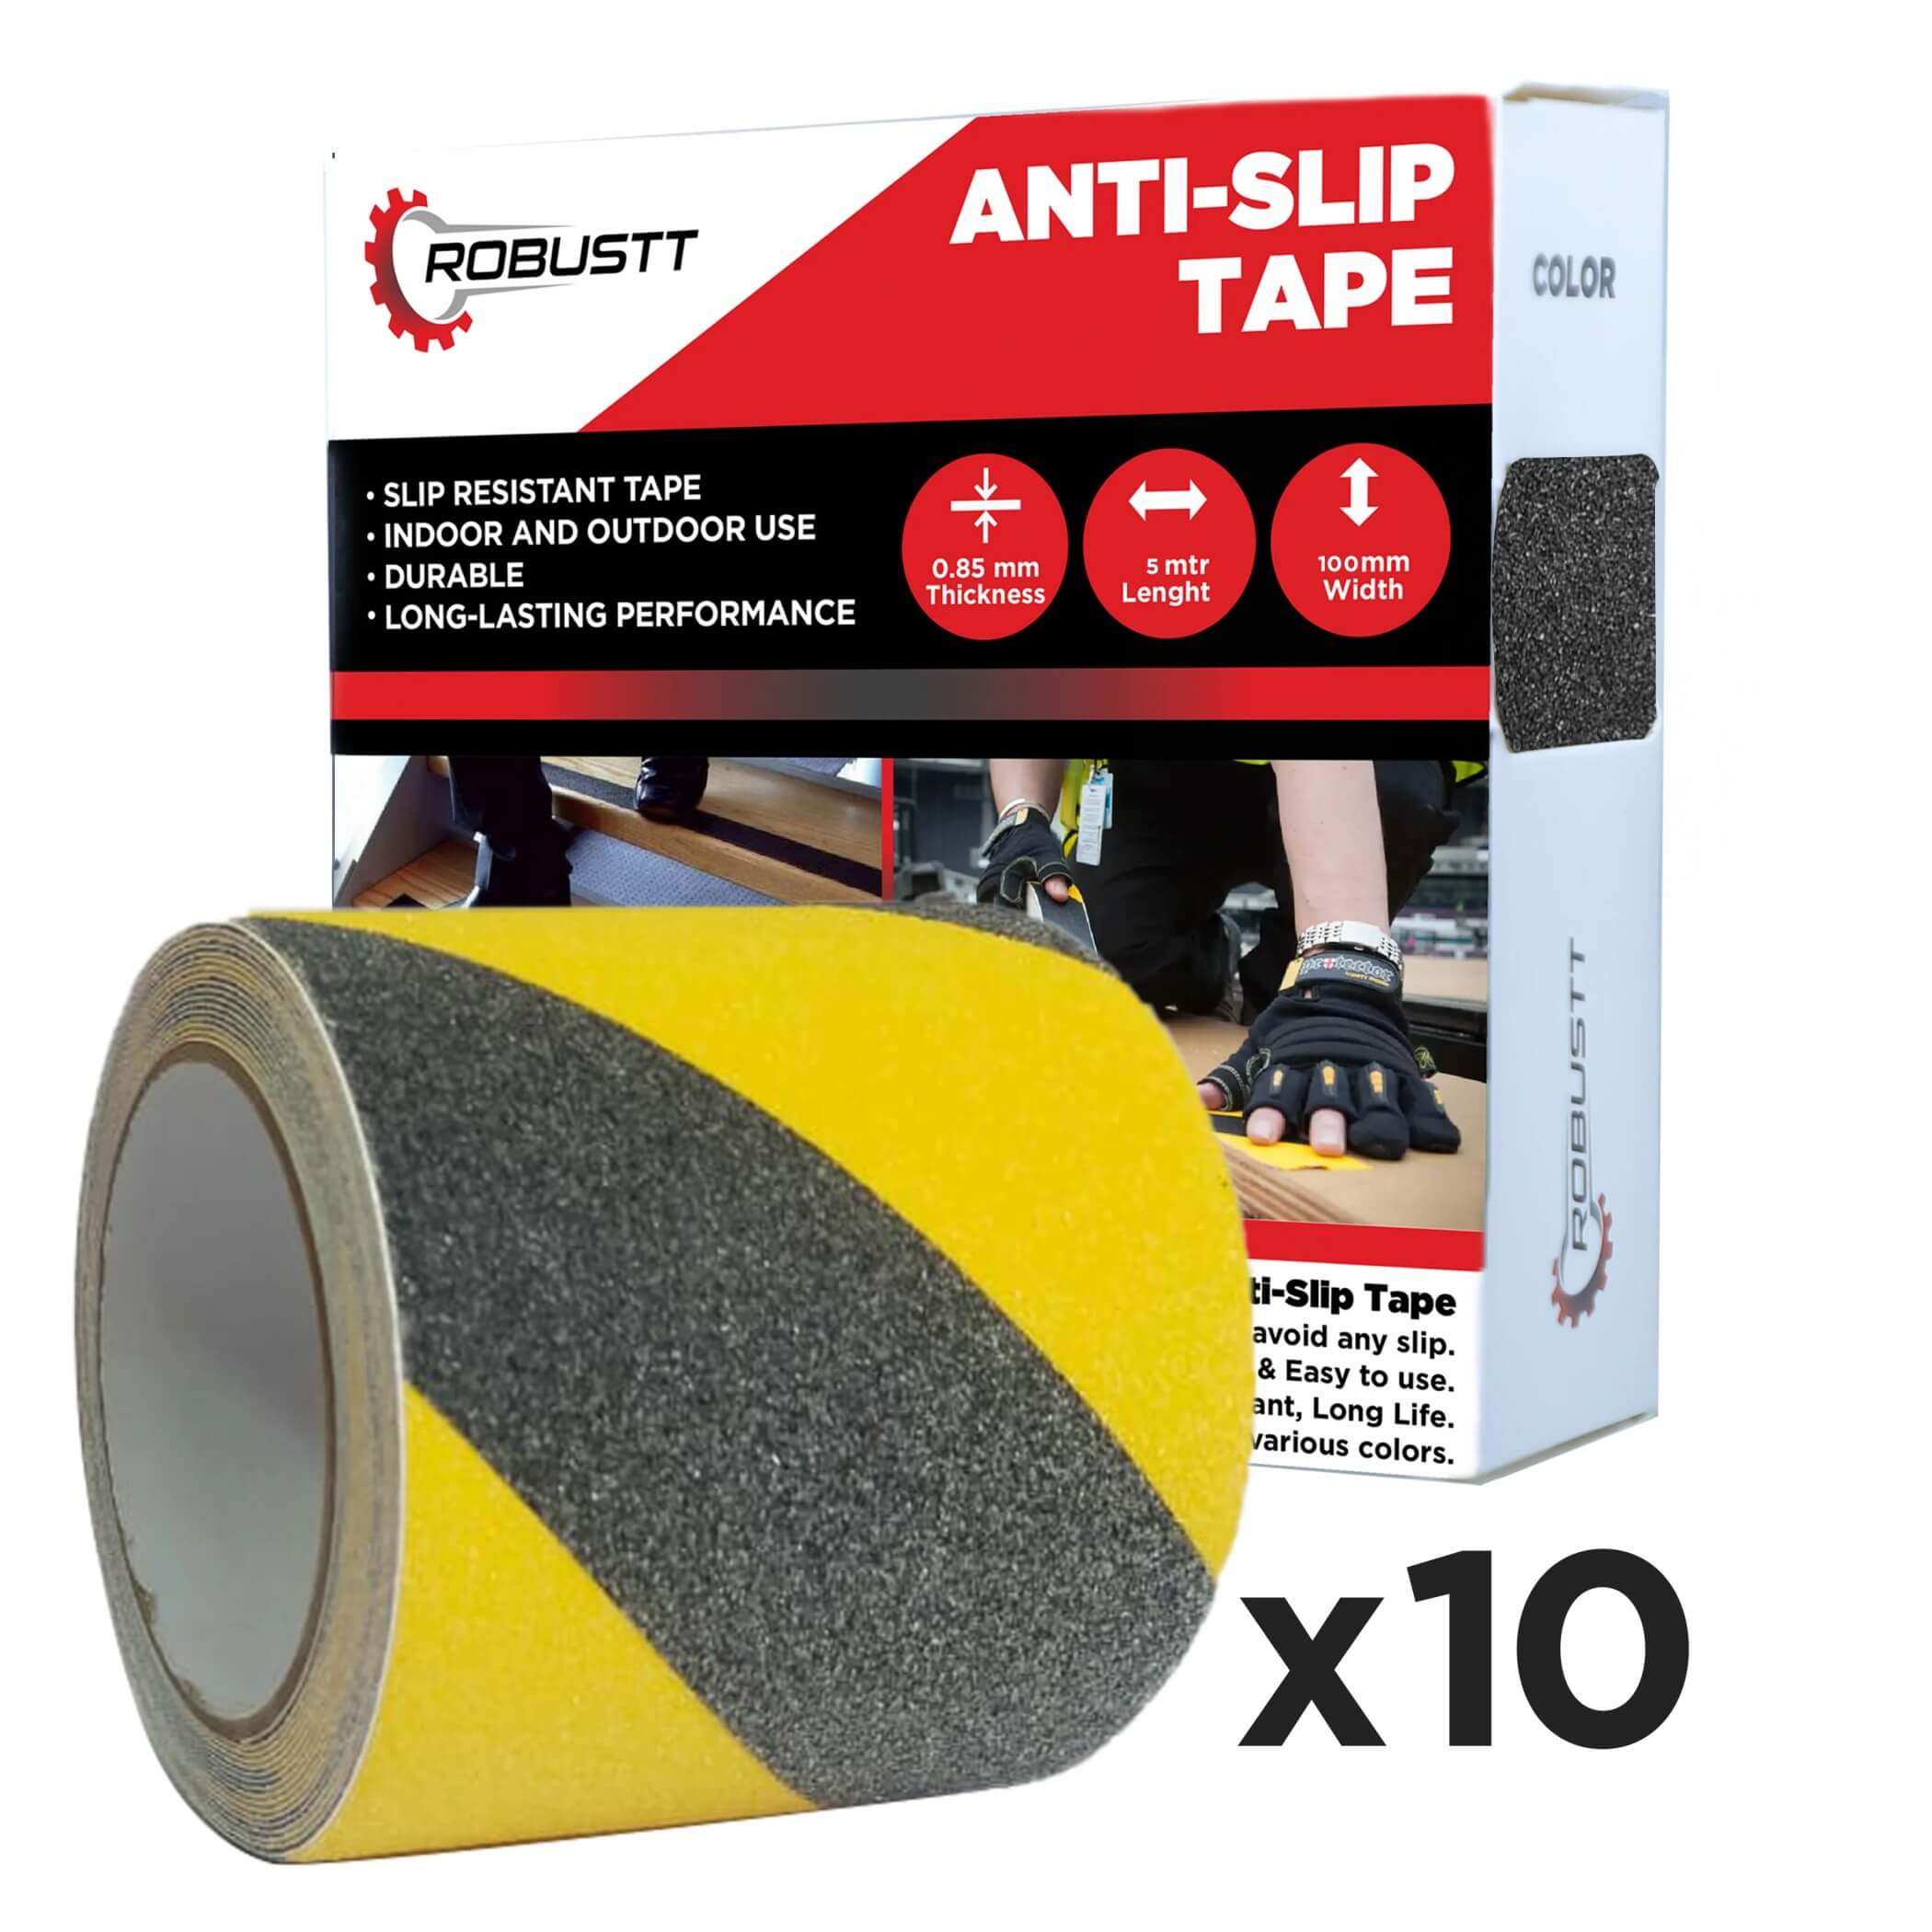 robustt-anti-skid-antislip-5mtr-guaranteed-x100mm-yellow-black-fall-resistant-with-pet-material-and-solvent-acrylic-adhesive-tape-pack-of-10